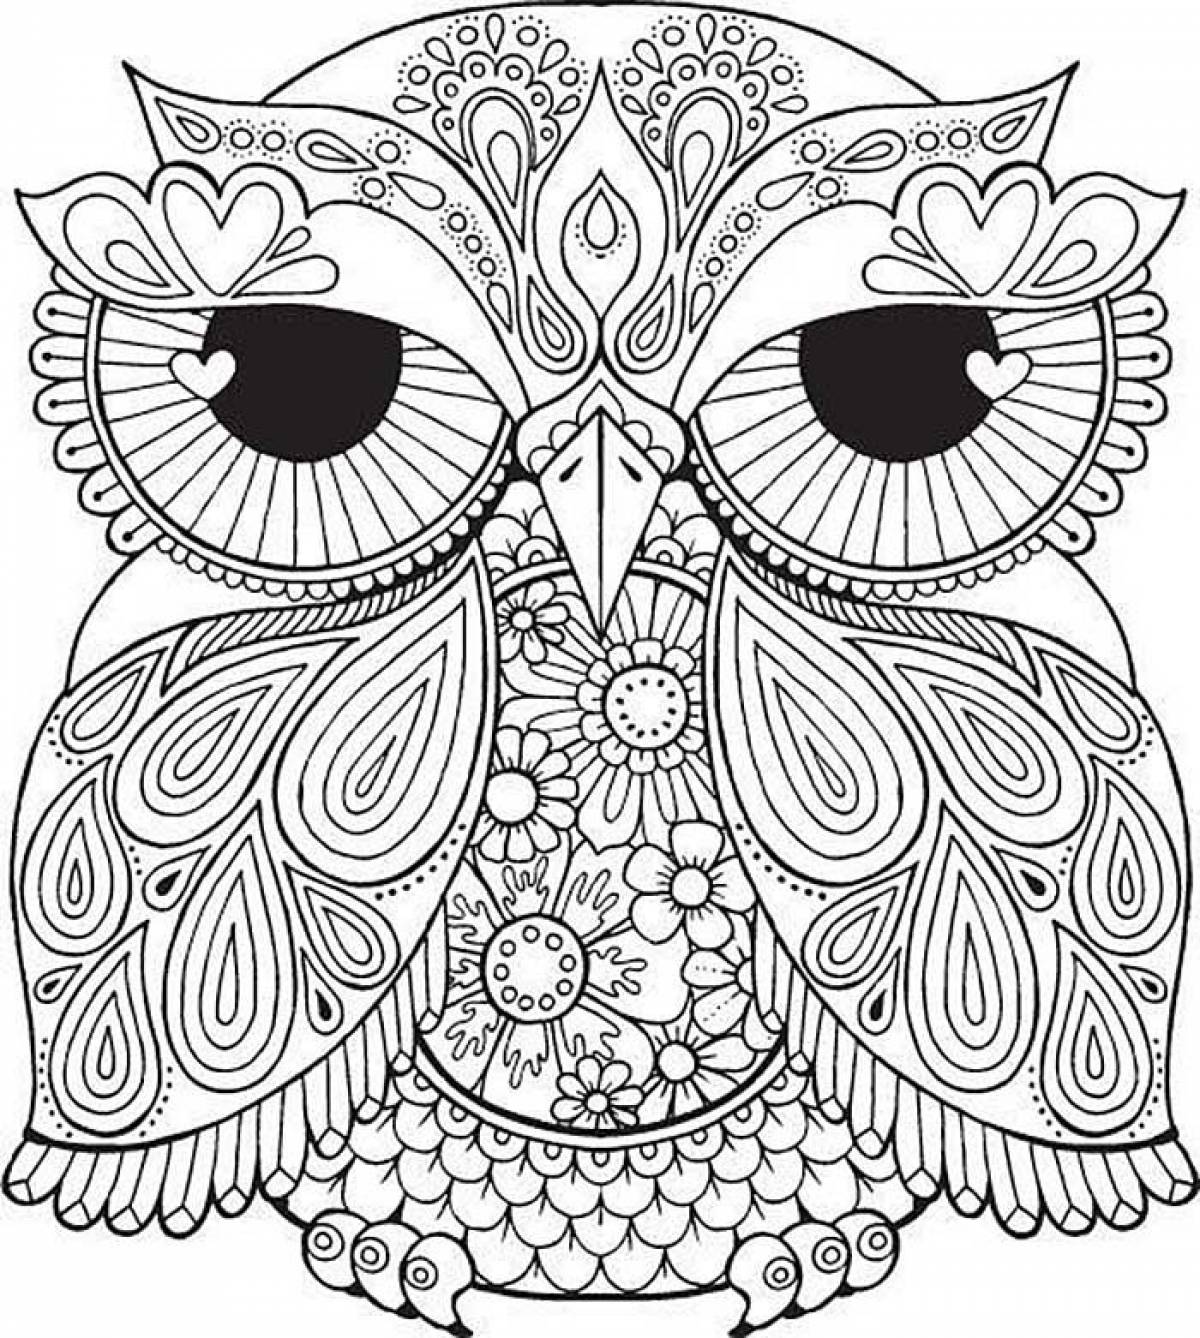 Owl antistress picture